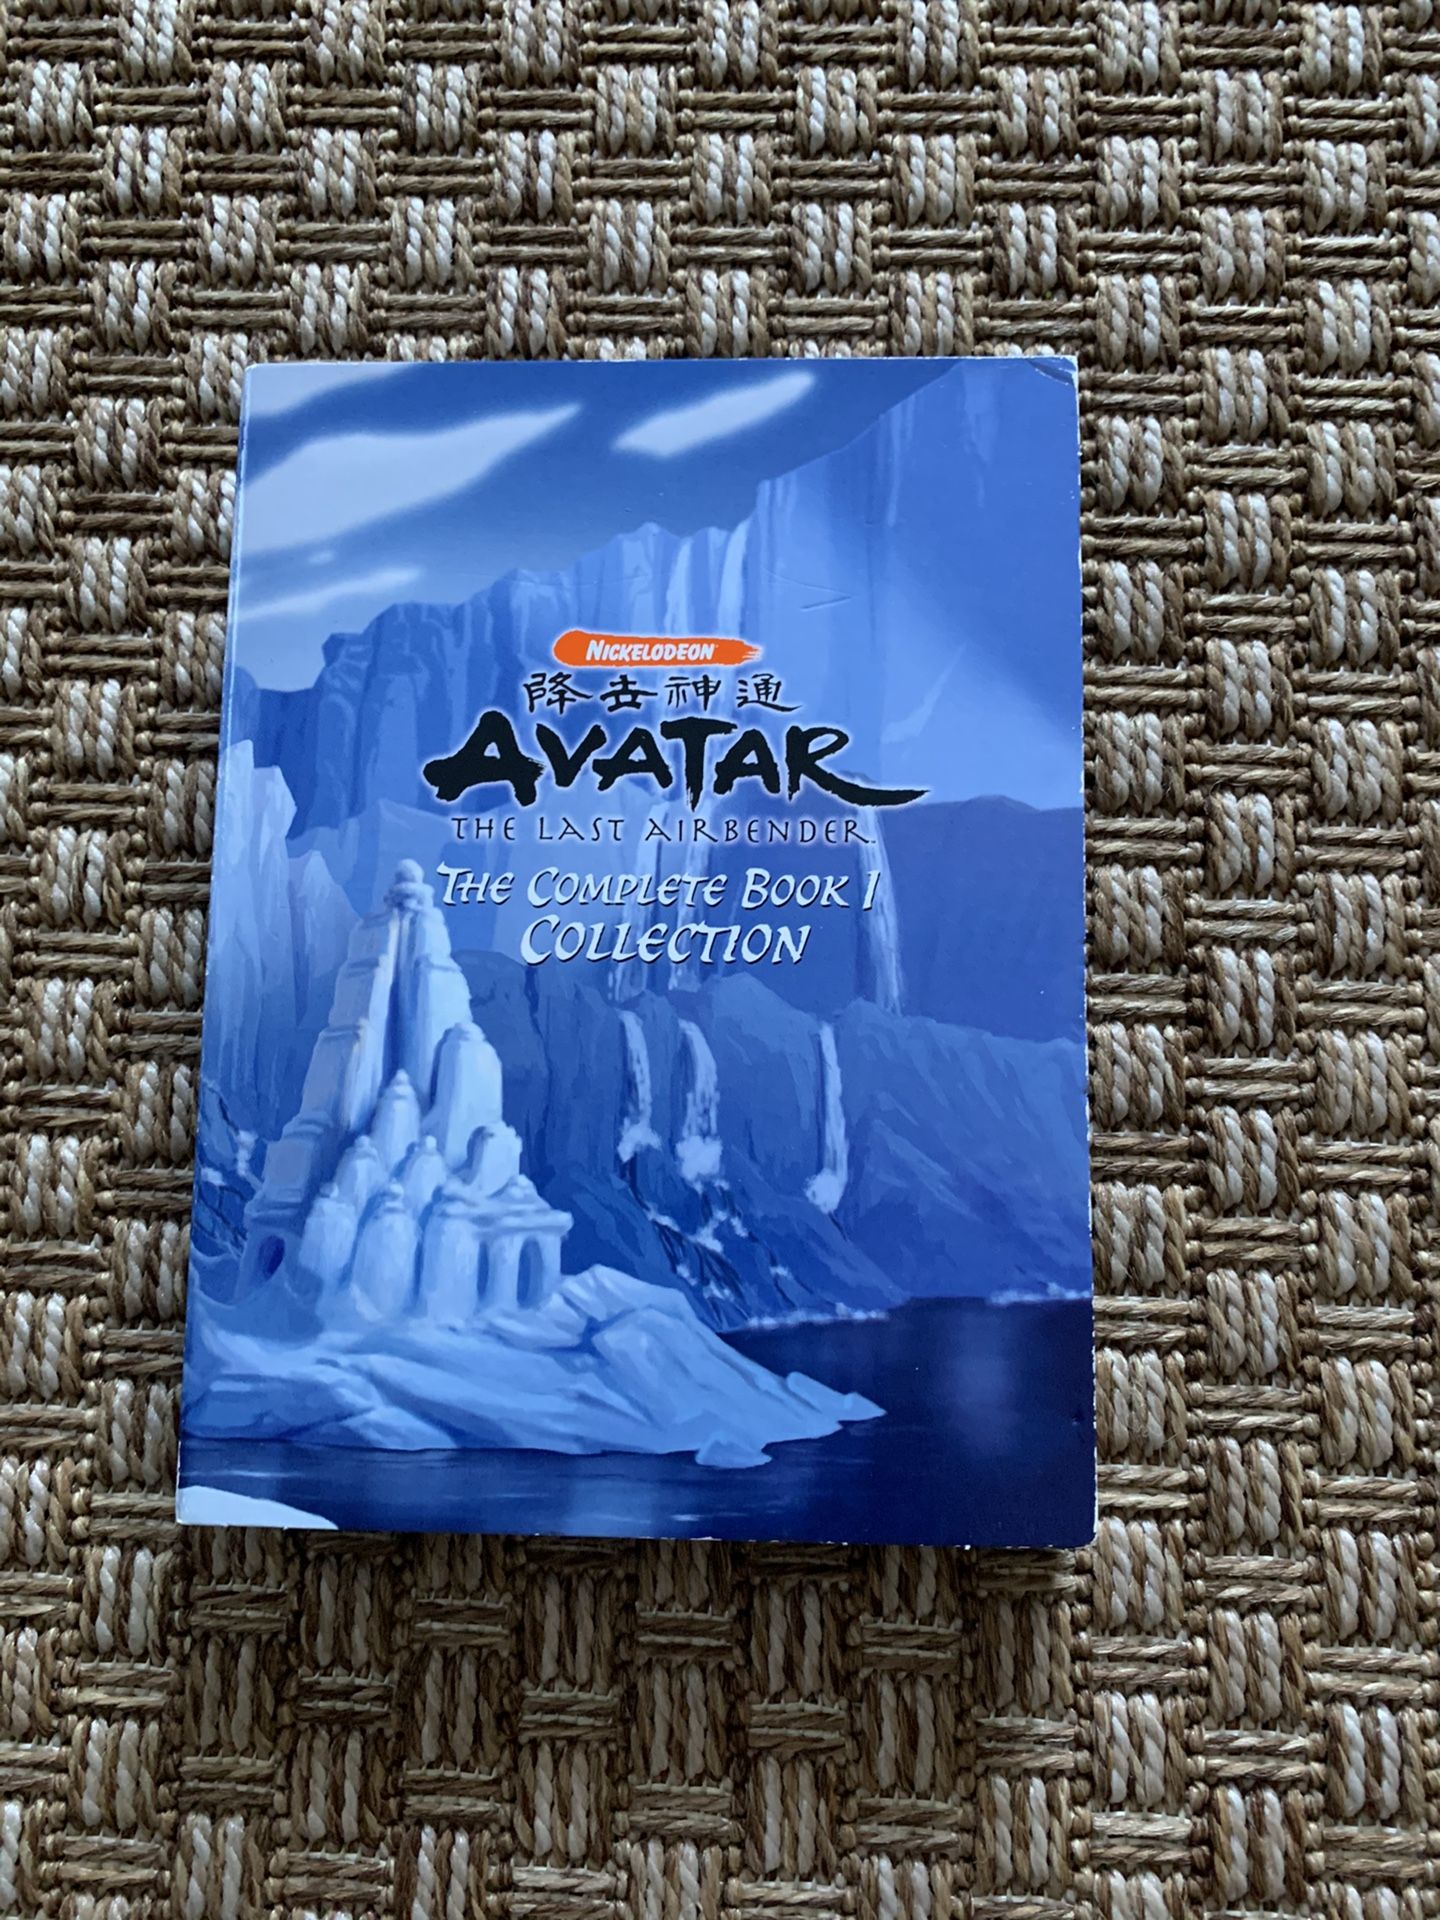 AVATAR THE LAST AIRBENDER - The Complete Book 1 Collection (2006) 6 disc